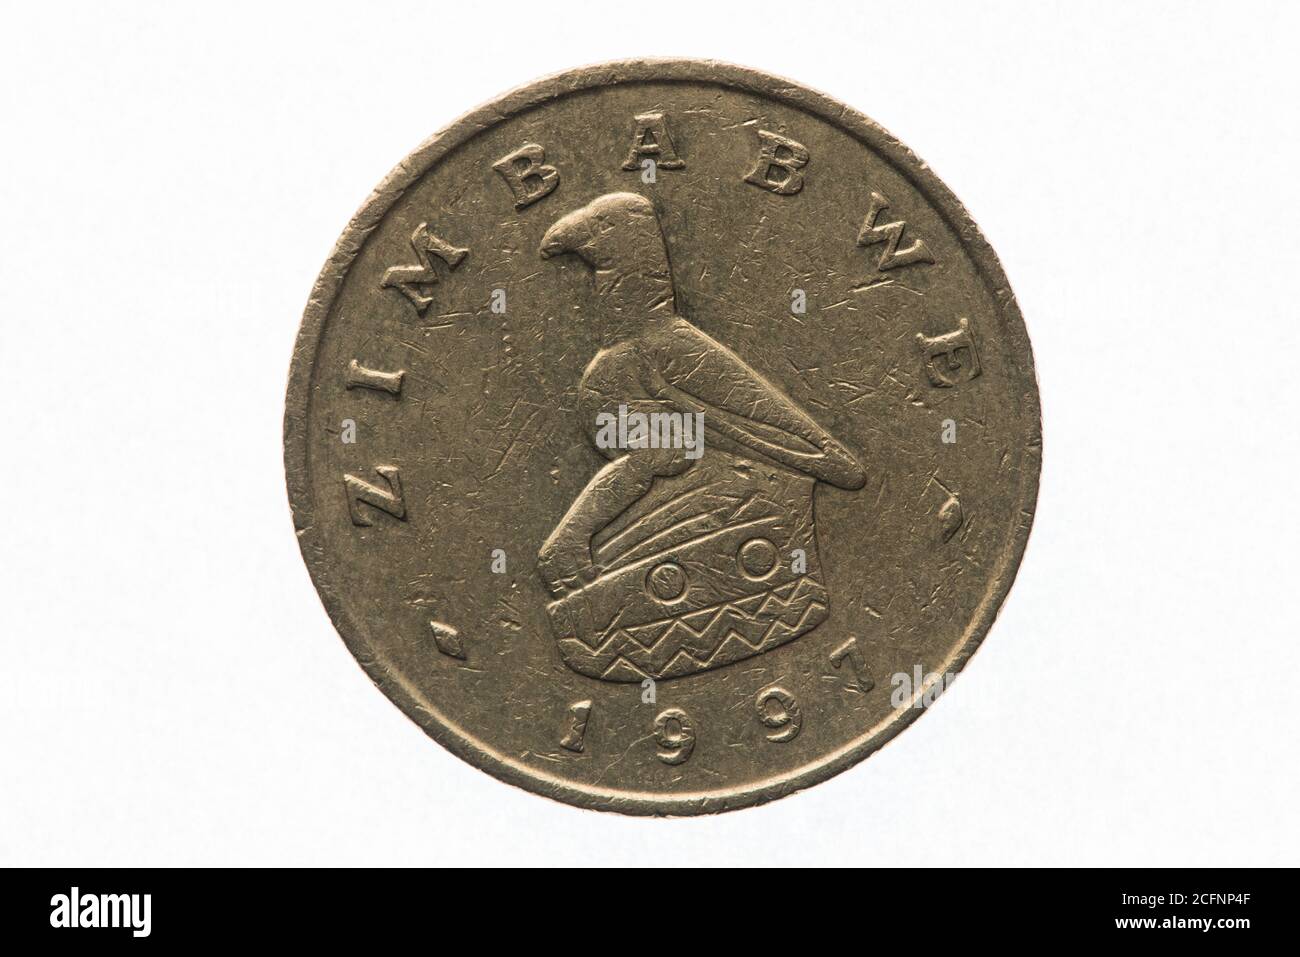 A $2 dollar coin from Zimbabwe featuring the Zimbabwe bird an national icon. Stock Photo